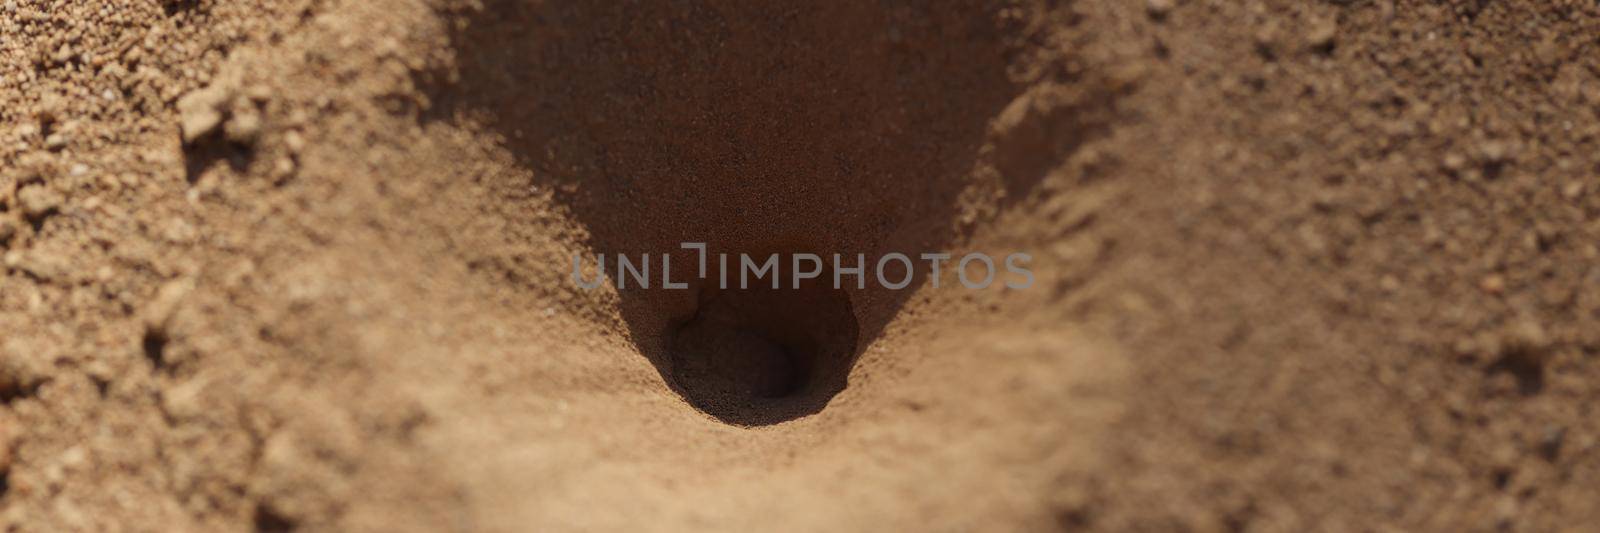 Old small hole in ground or steppe or field with texture of soil and sand by kuprevich